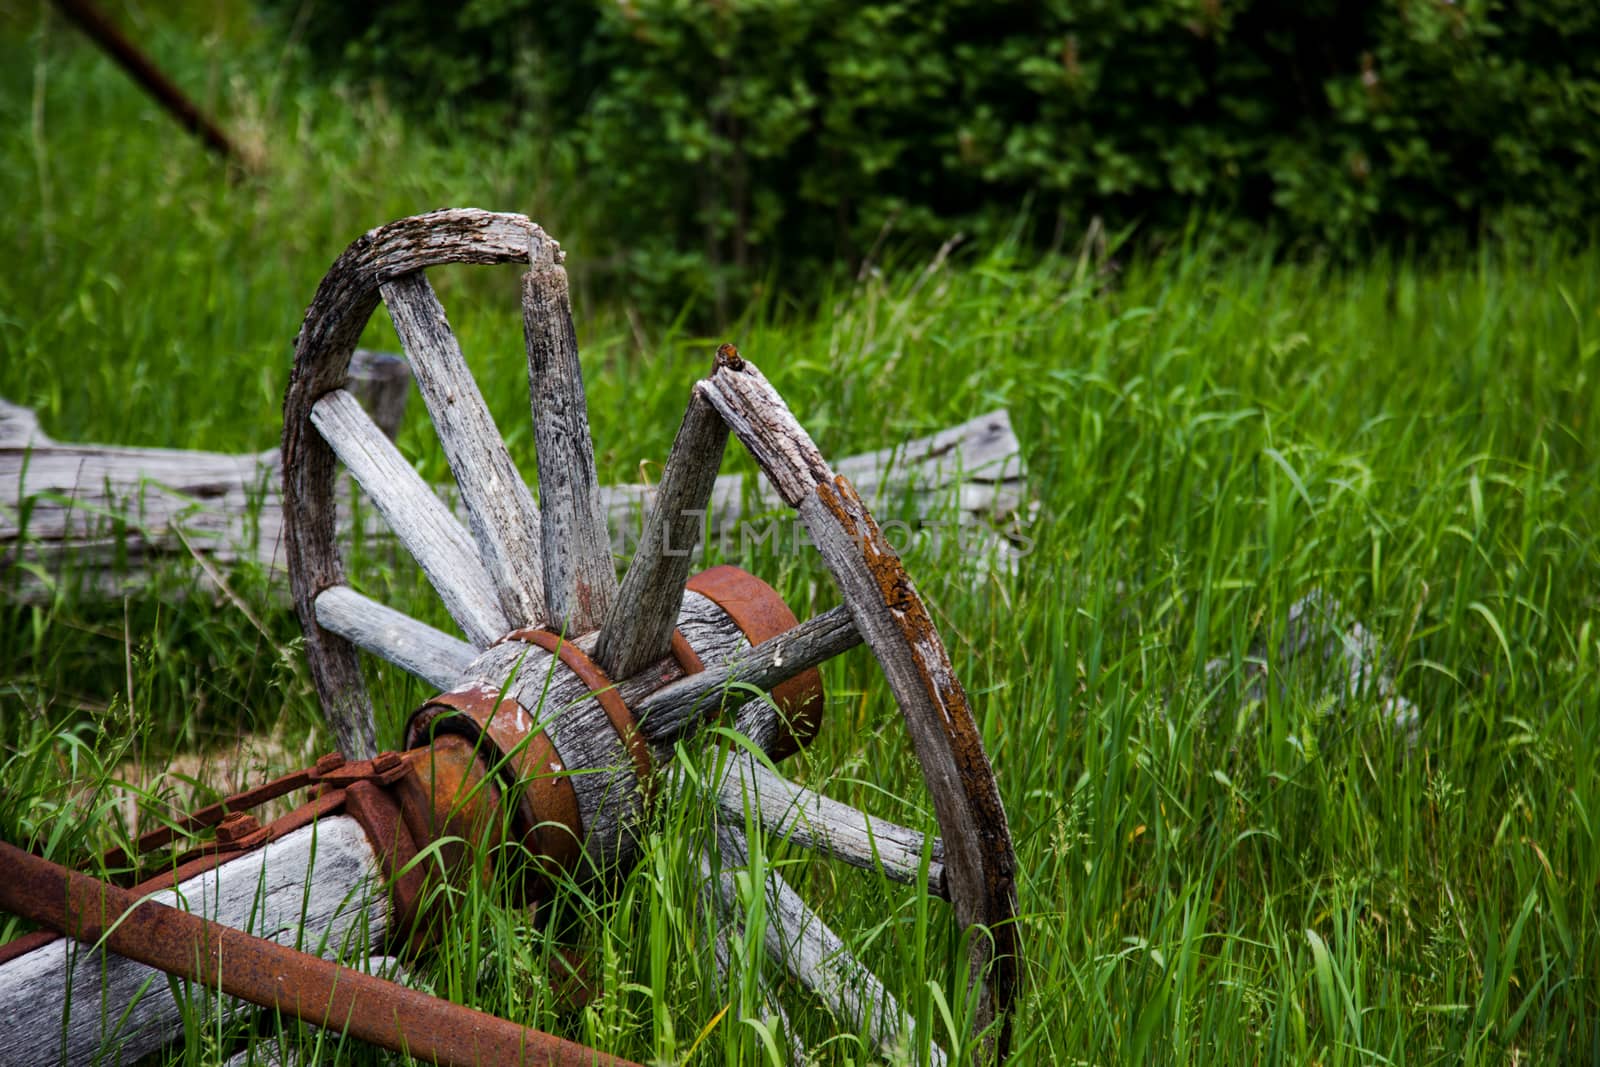 The remnants of an old wooden and rusty steel wagon, including a wood wagon wheel, are lying in tall grass in a rural setting.